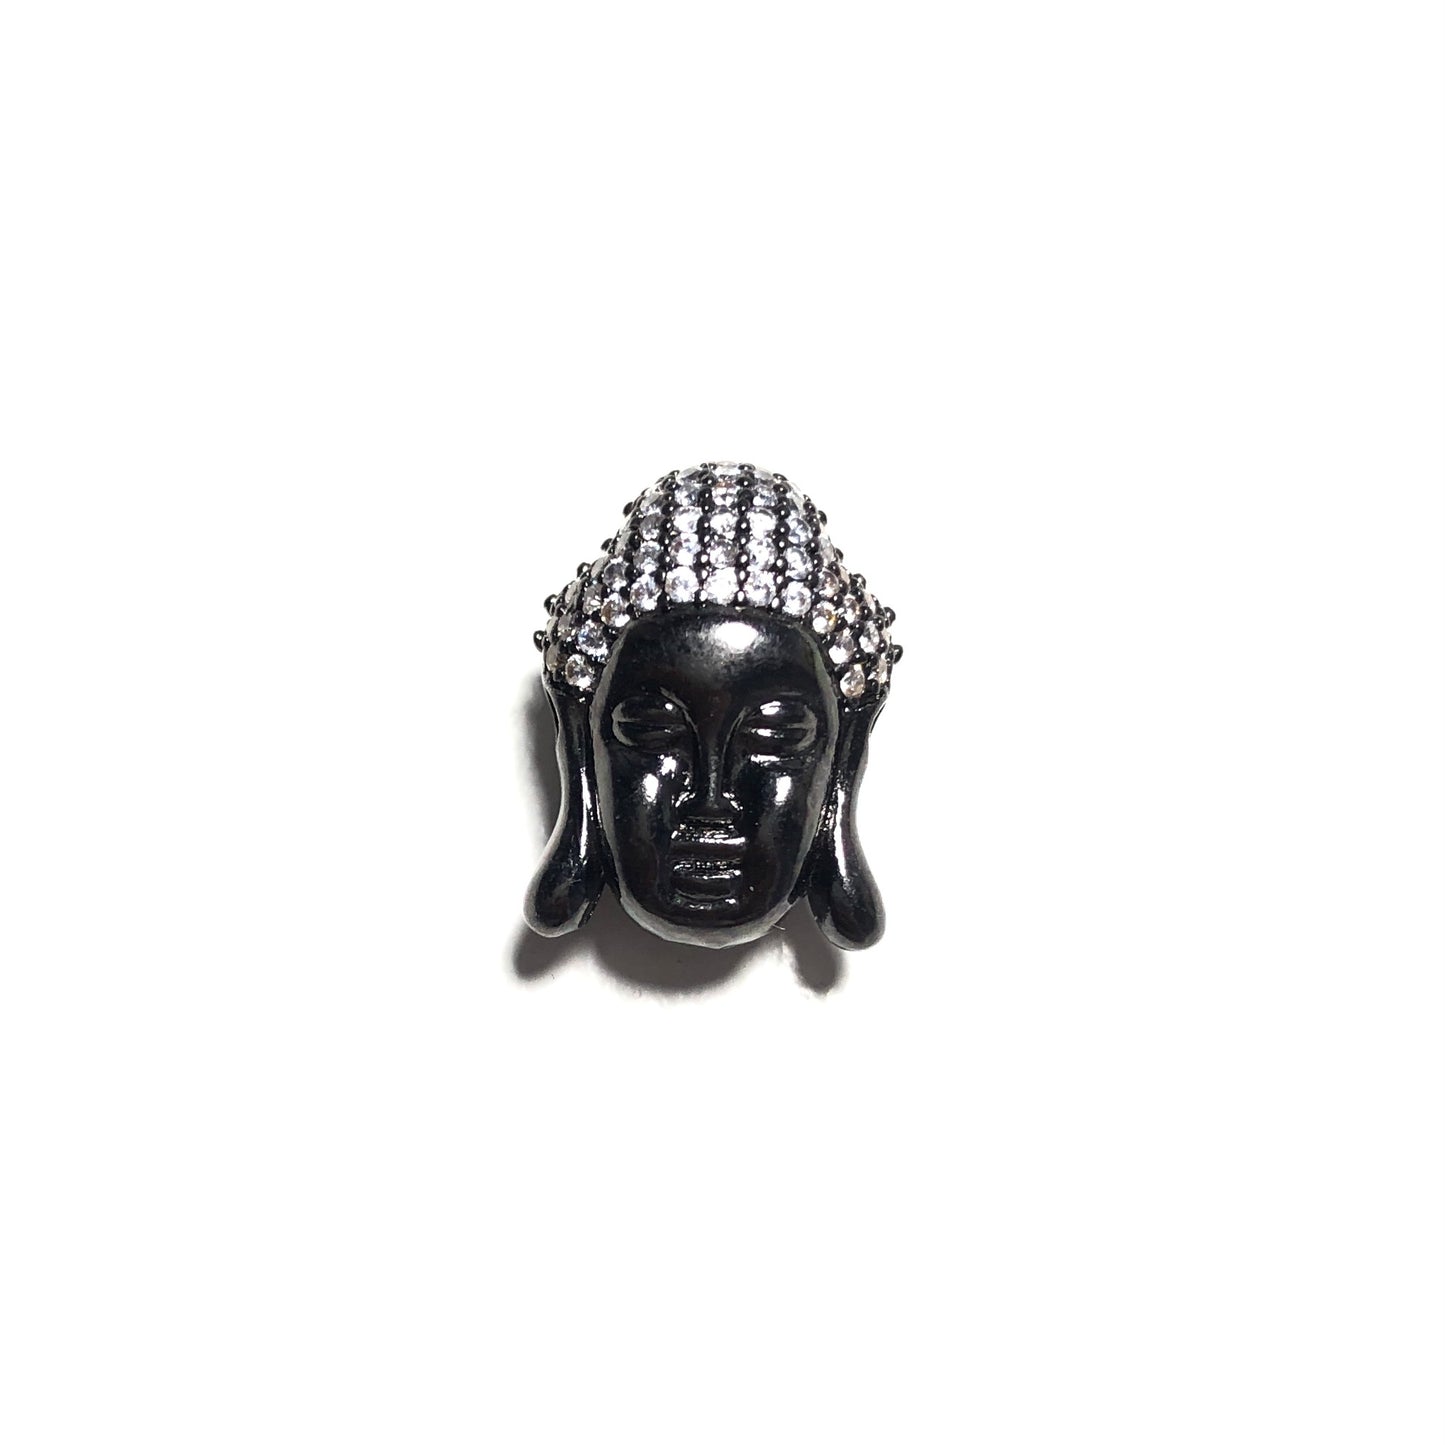 10pcs/lot 18*14mm CZ Paved Buddha Spacers Black CZ Paved Spacers Charms Beads Beyond